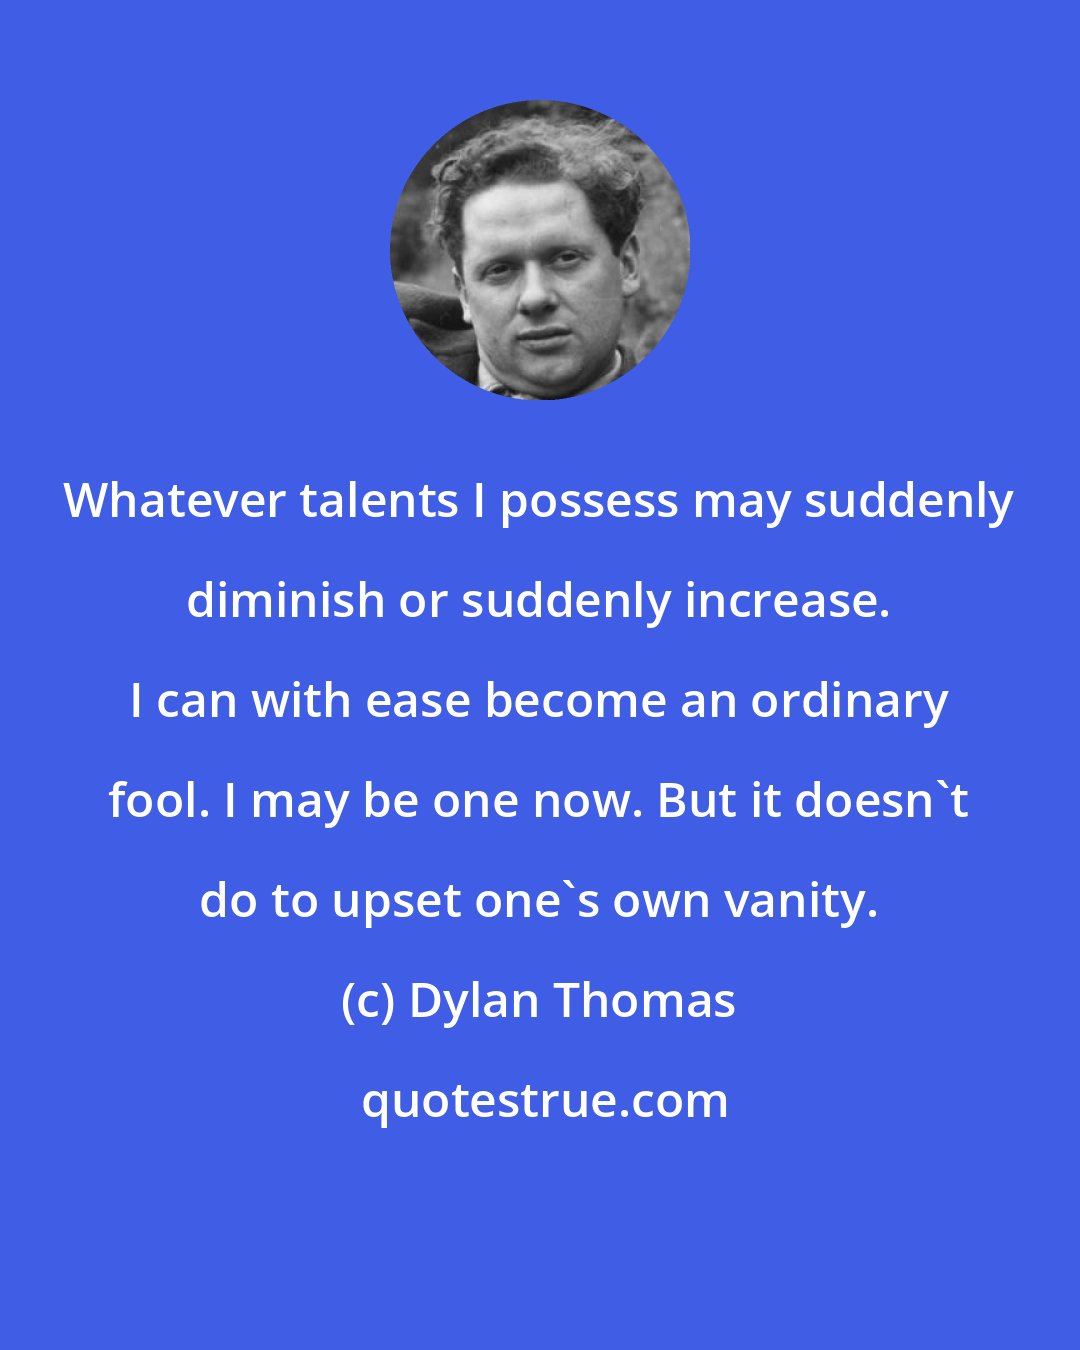 Dylan Thomas: Whatever talents I possess may suddenly diminish or suddenly increase. I can with ease become an ordinary fool. I may be one now. But it doesn't do to upset one's own vanity.